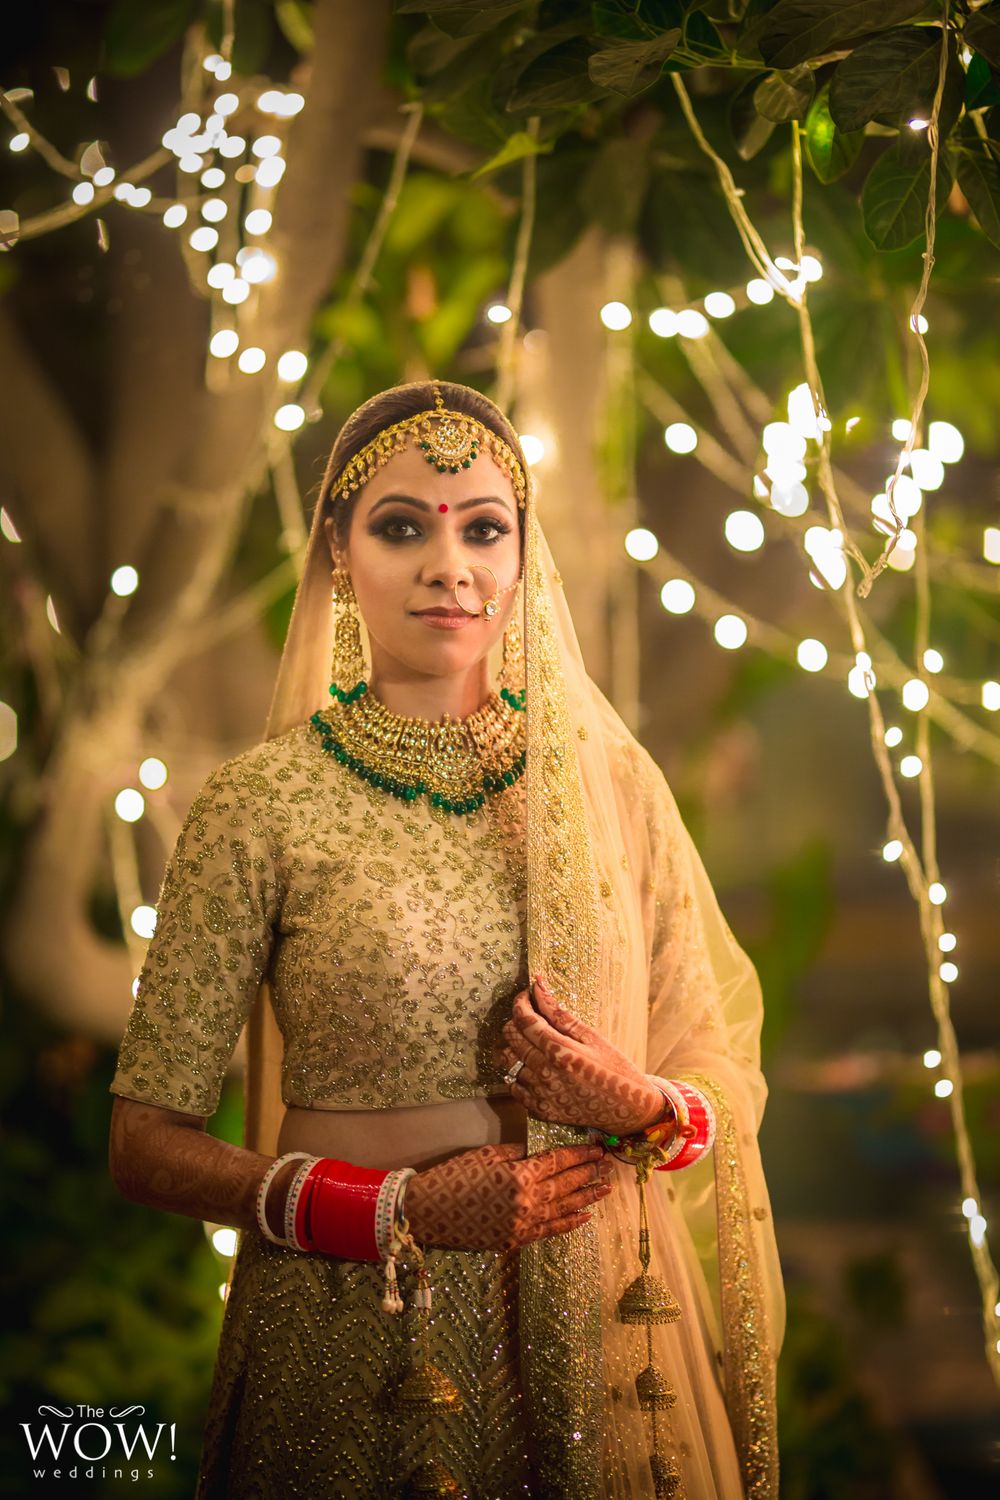 Photo of Bride in gold with green jewellery